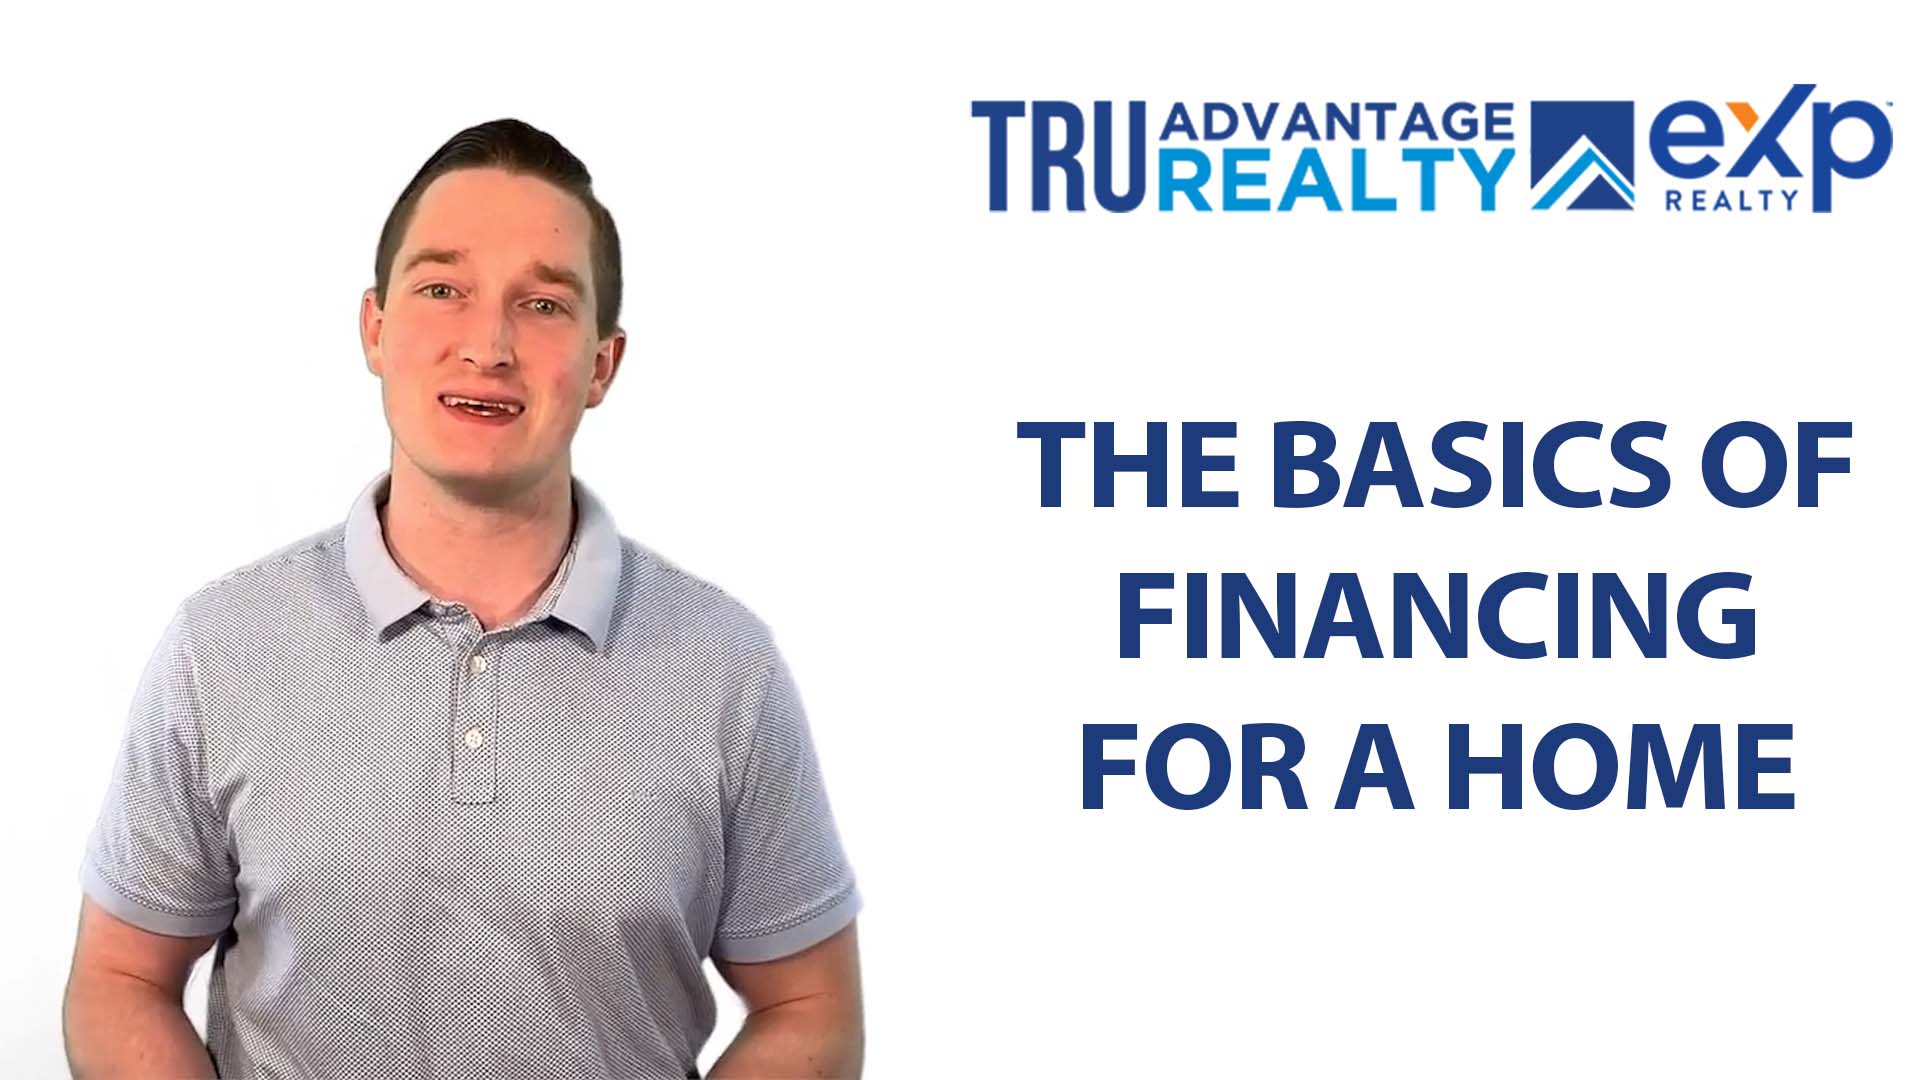 What Type of Financing Works Best For You?